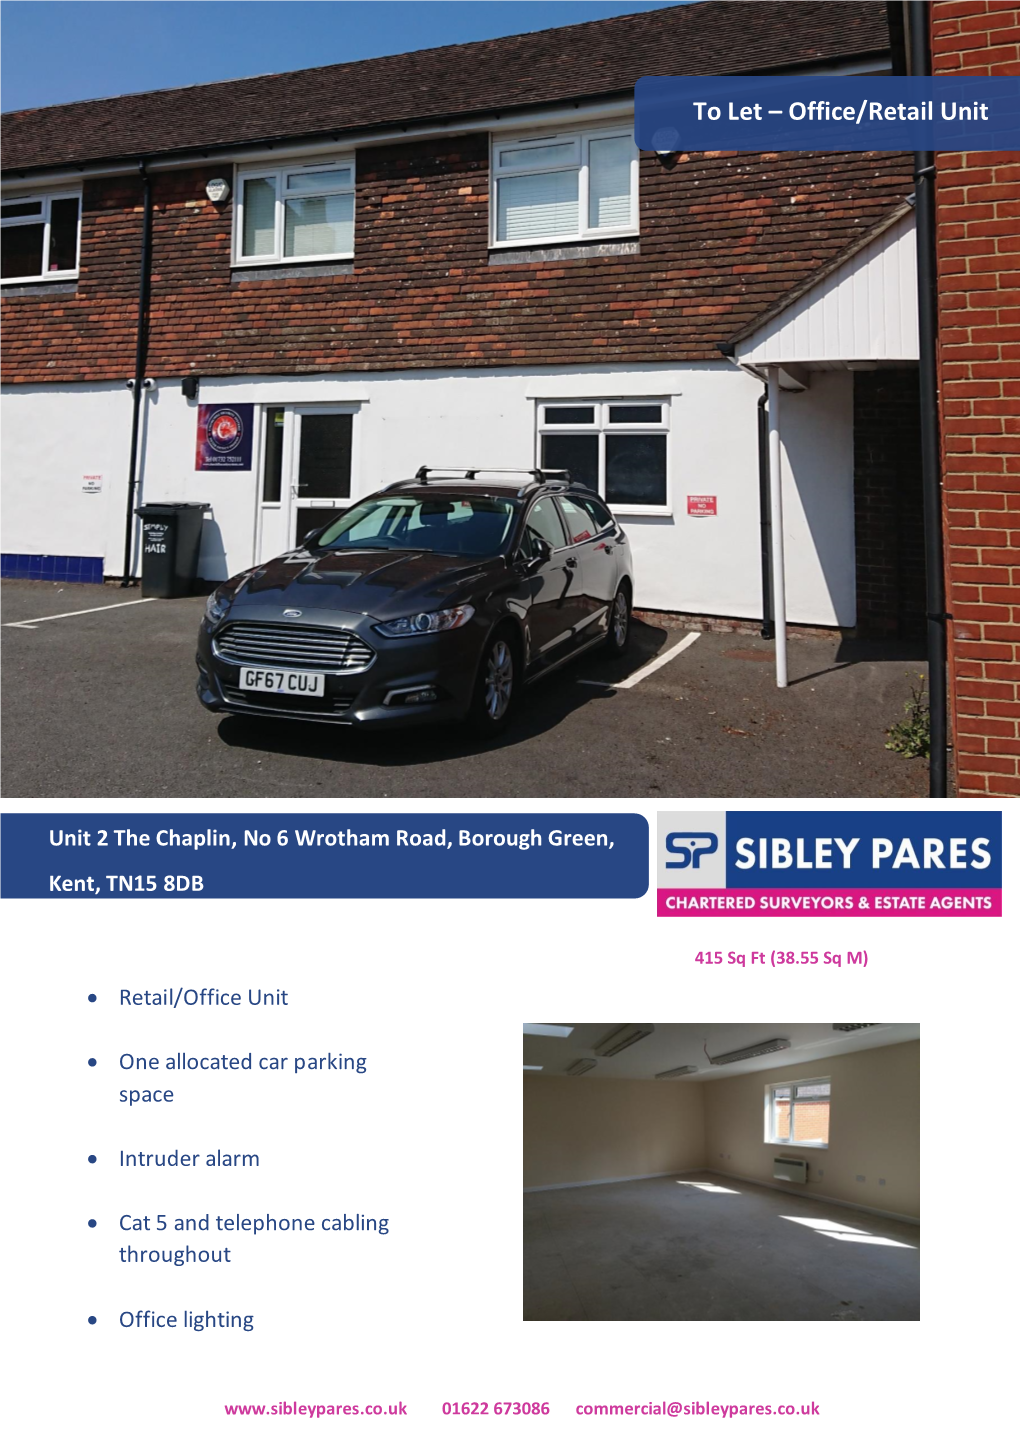 To Let – Office/Retail Unit